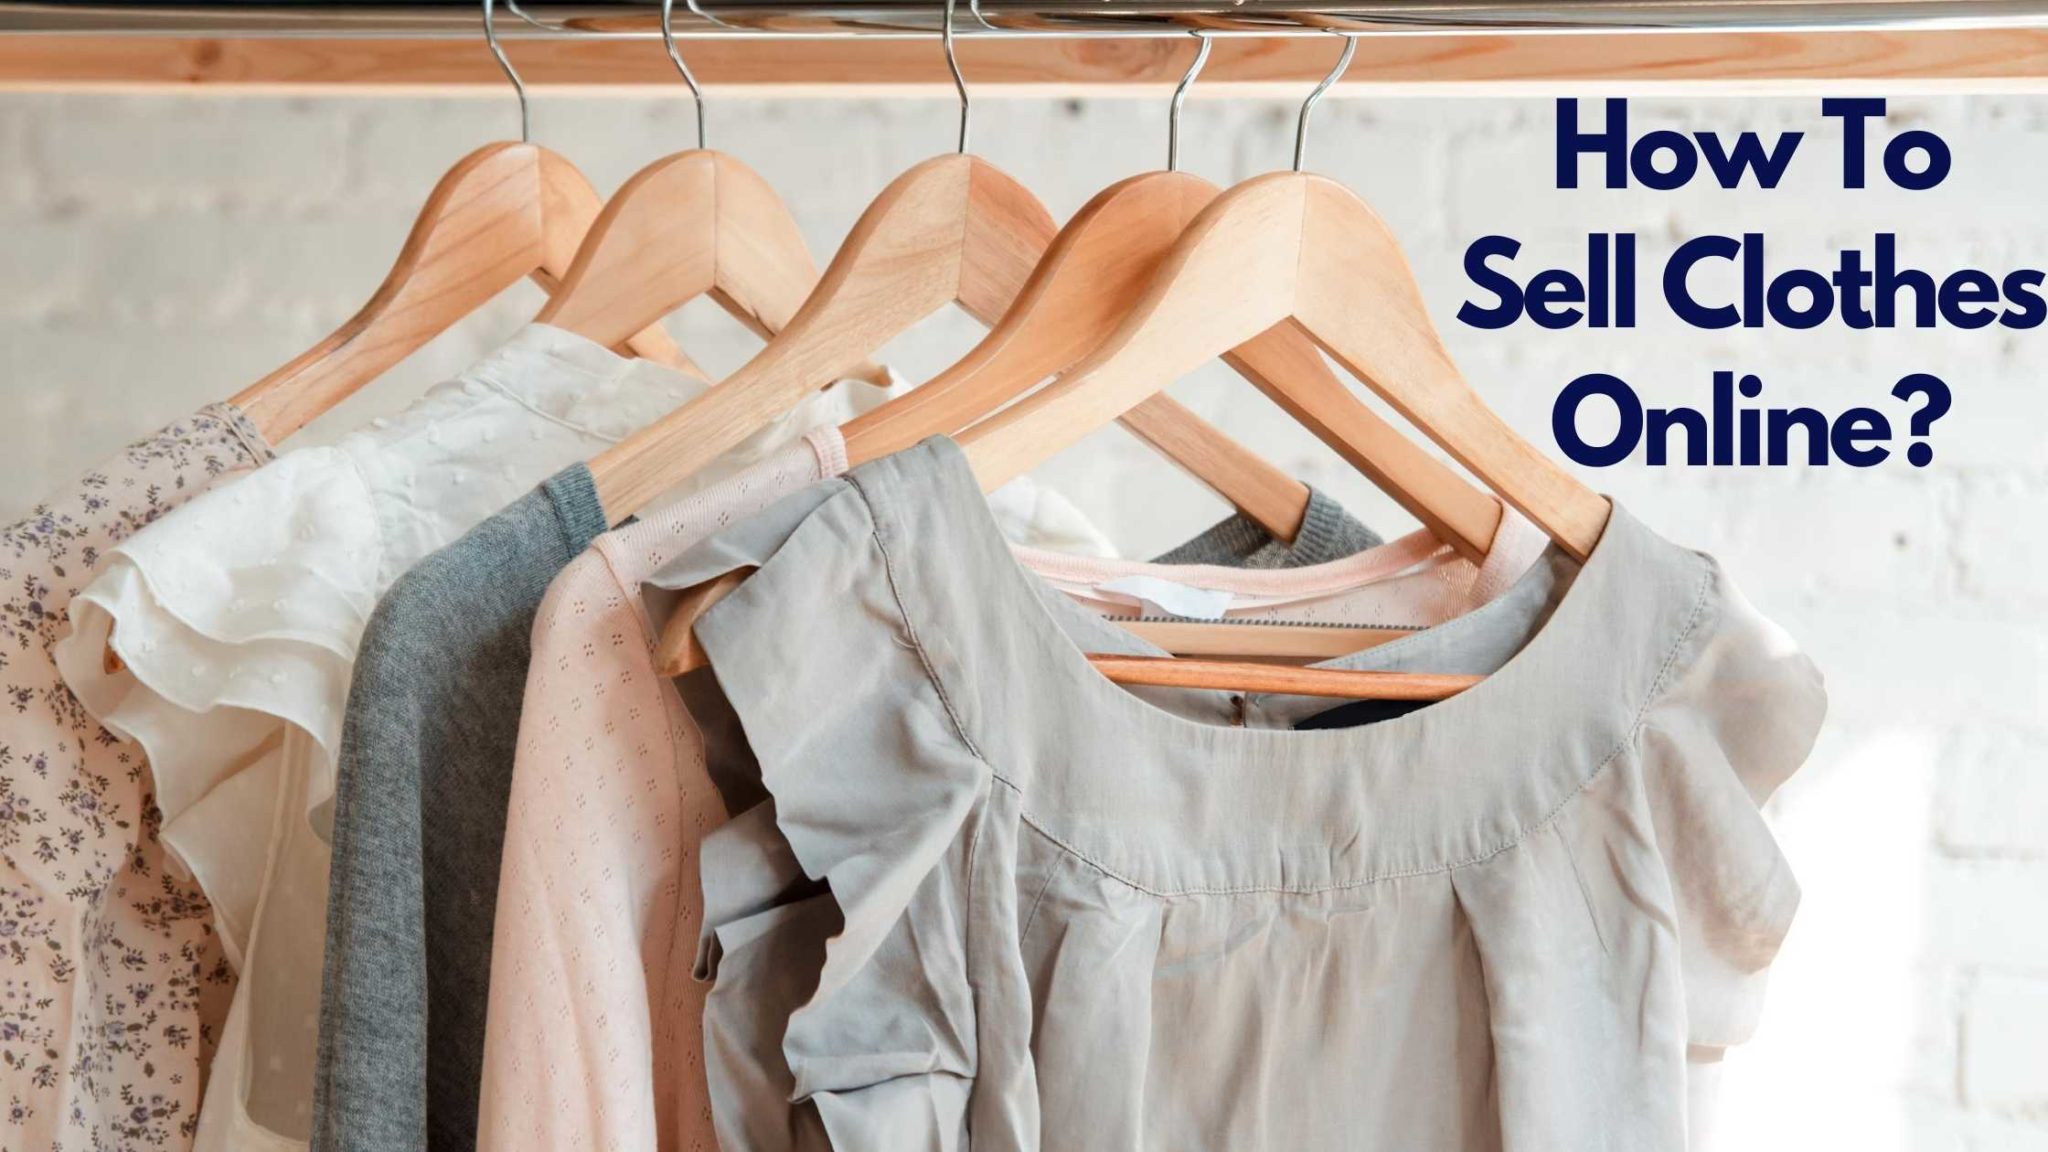 How to Sell Clothes Online | Sheepbuy Blog